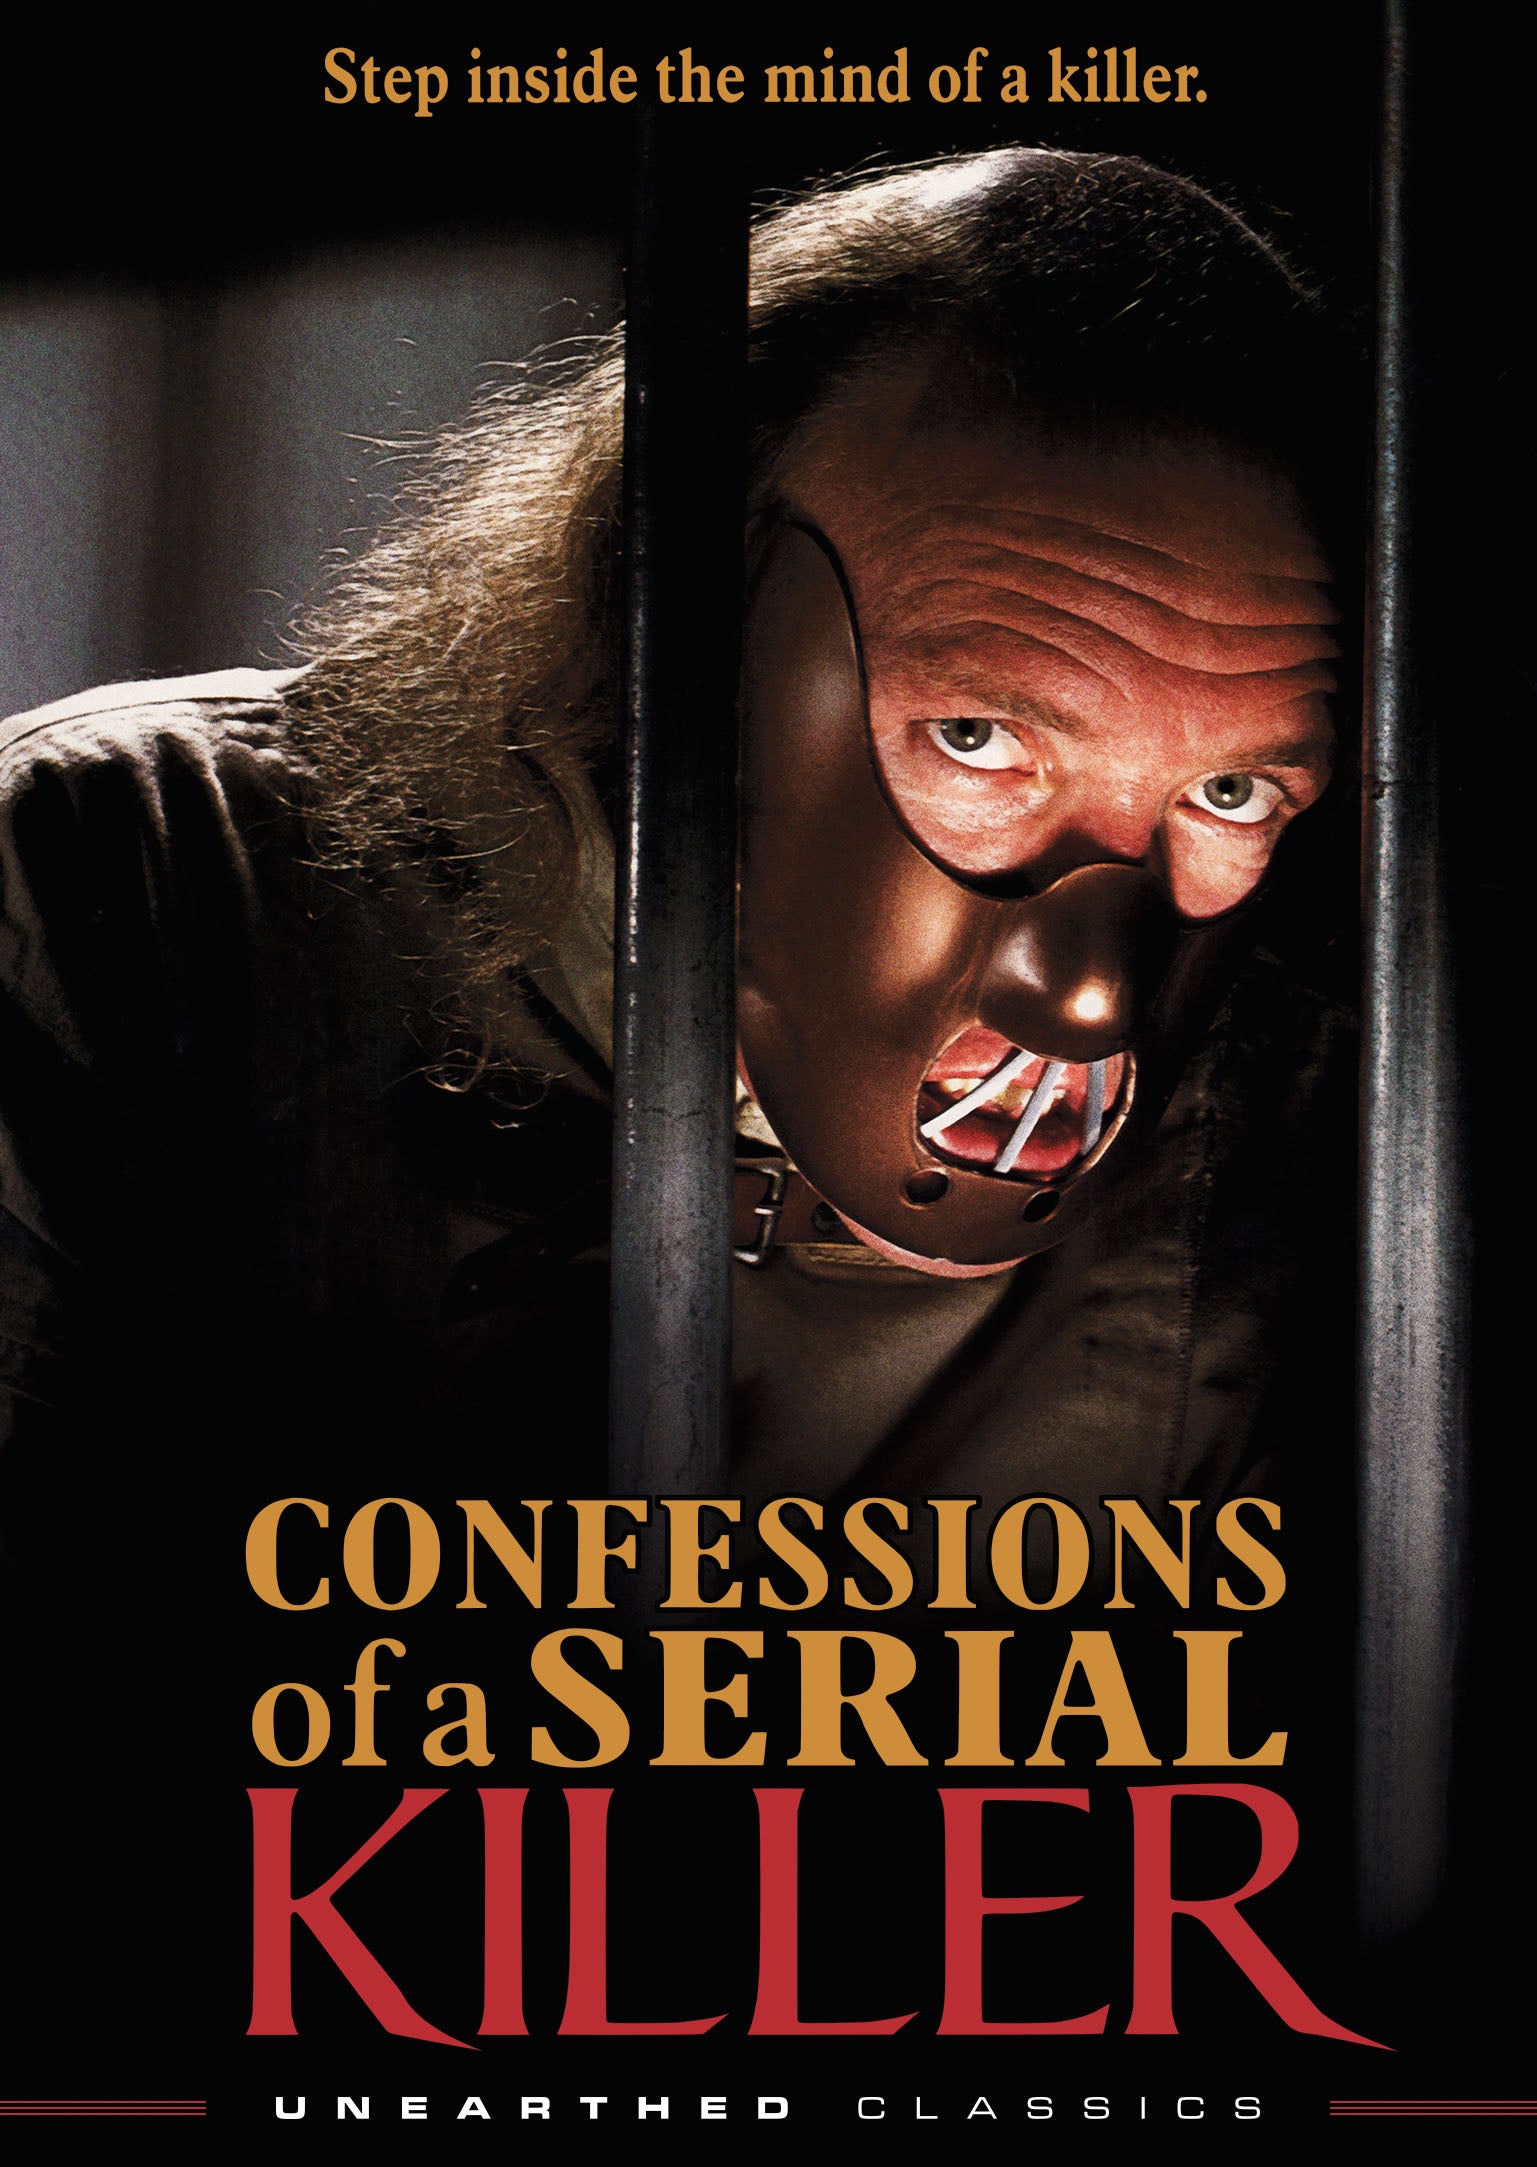 CONFESSIONS OF A SERIAL KILLER DVD [PRE-ORDER]